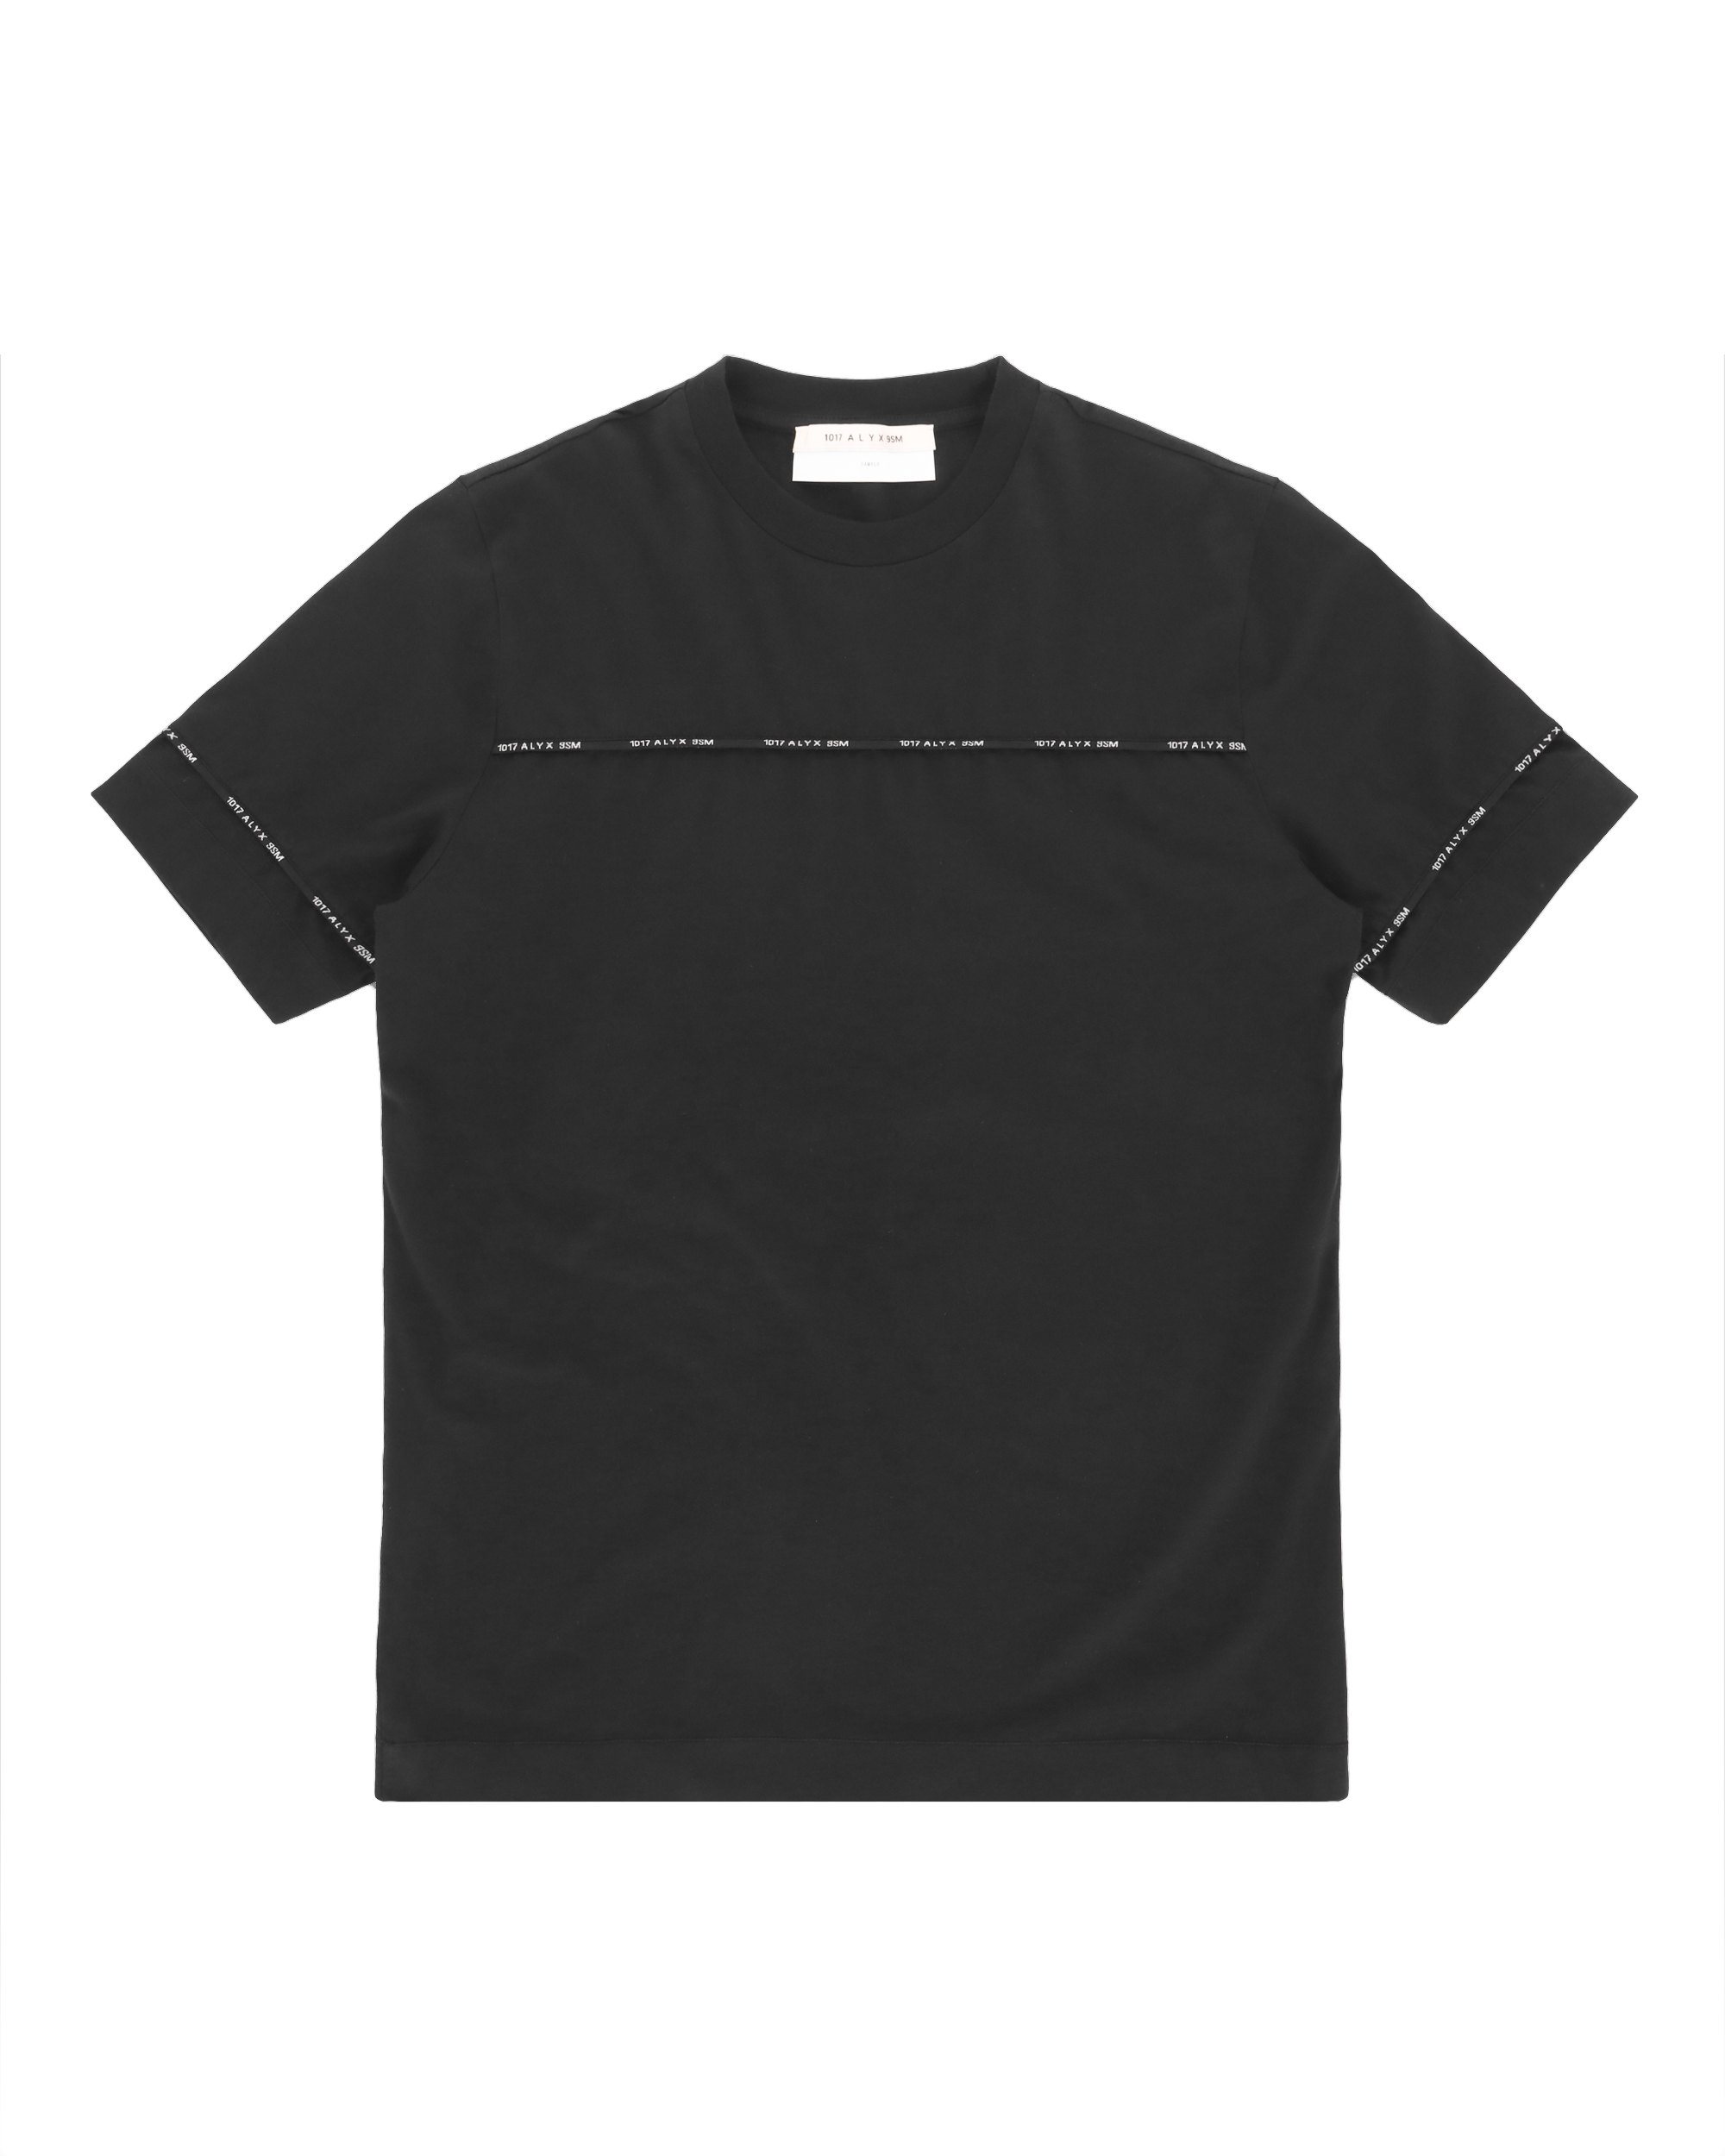 COLLECTION LOGO GRAPHIC T-SHIRT